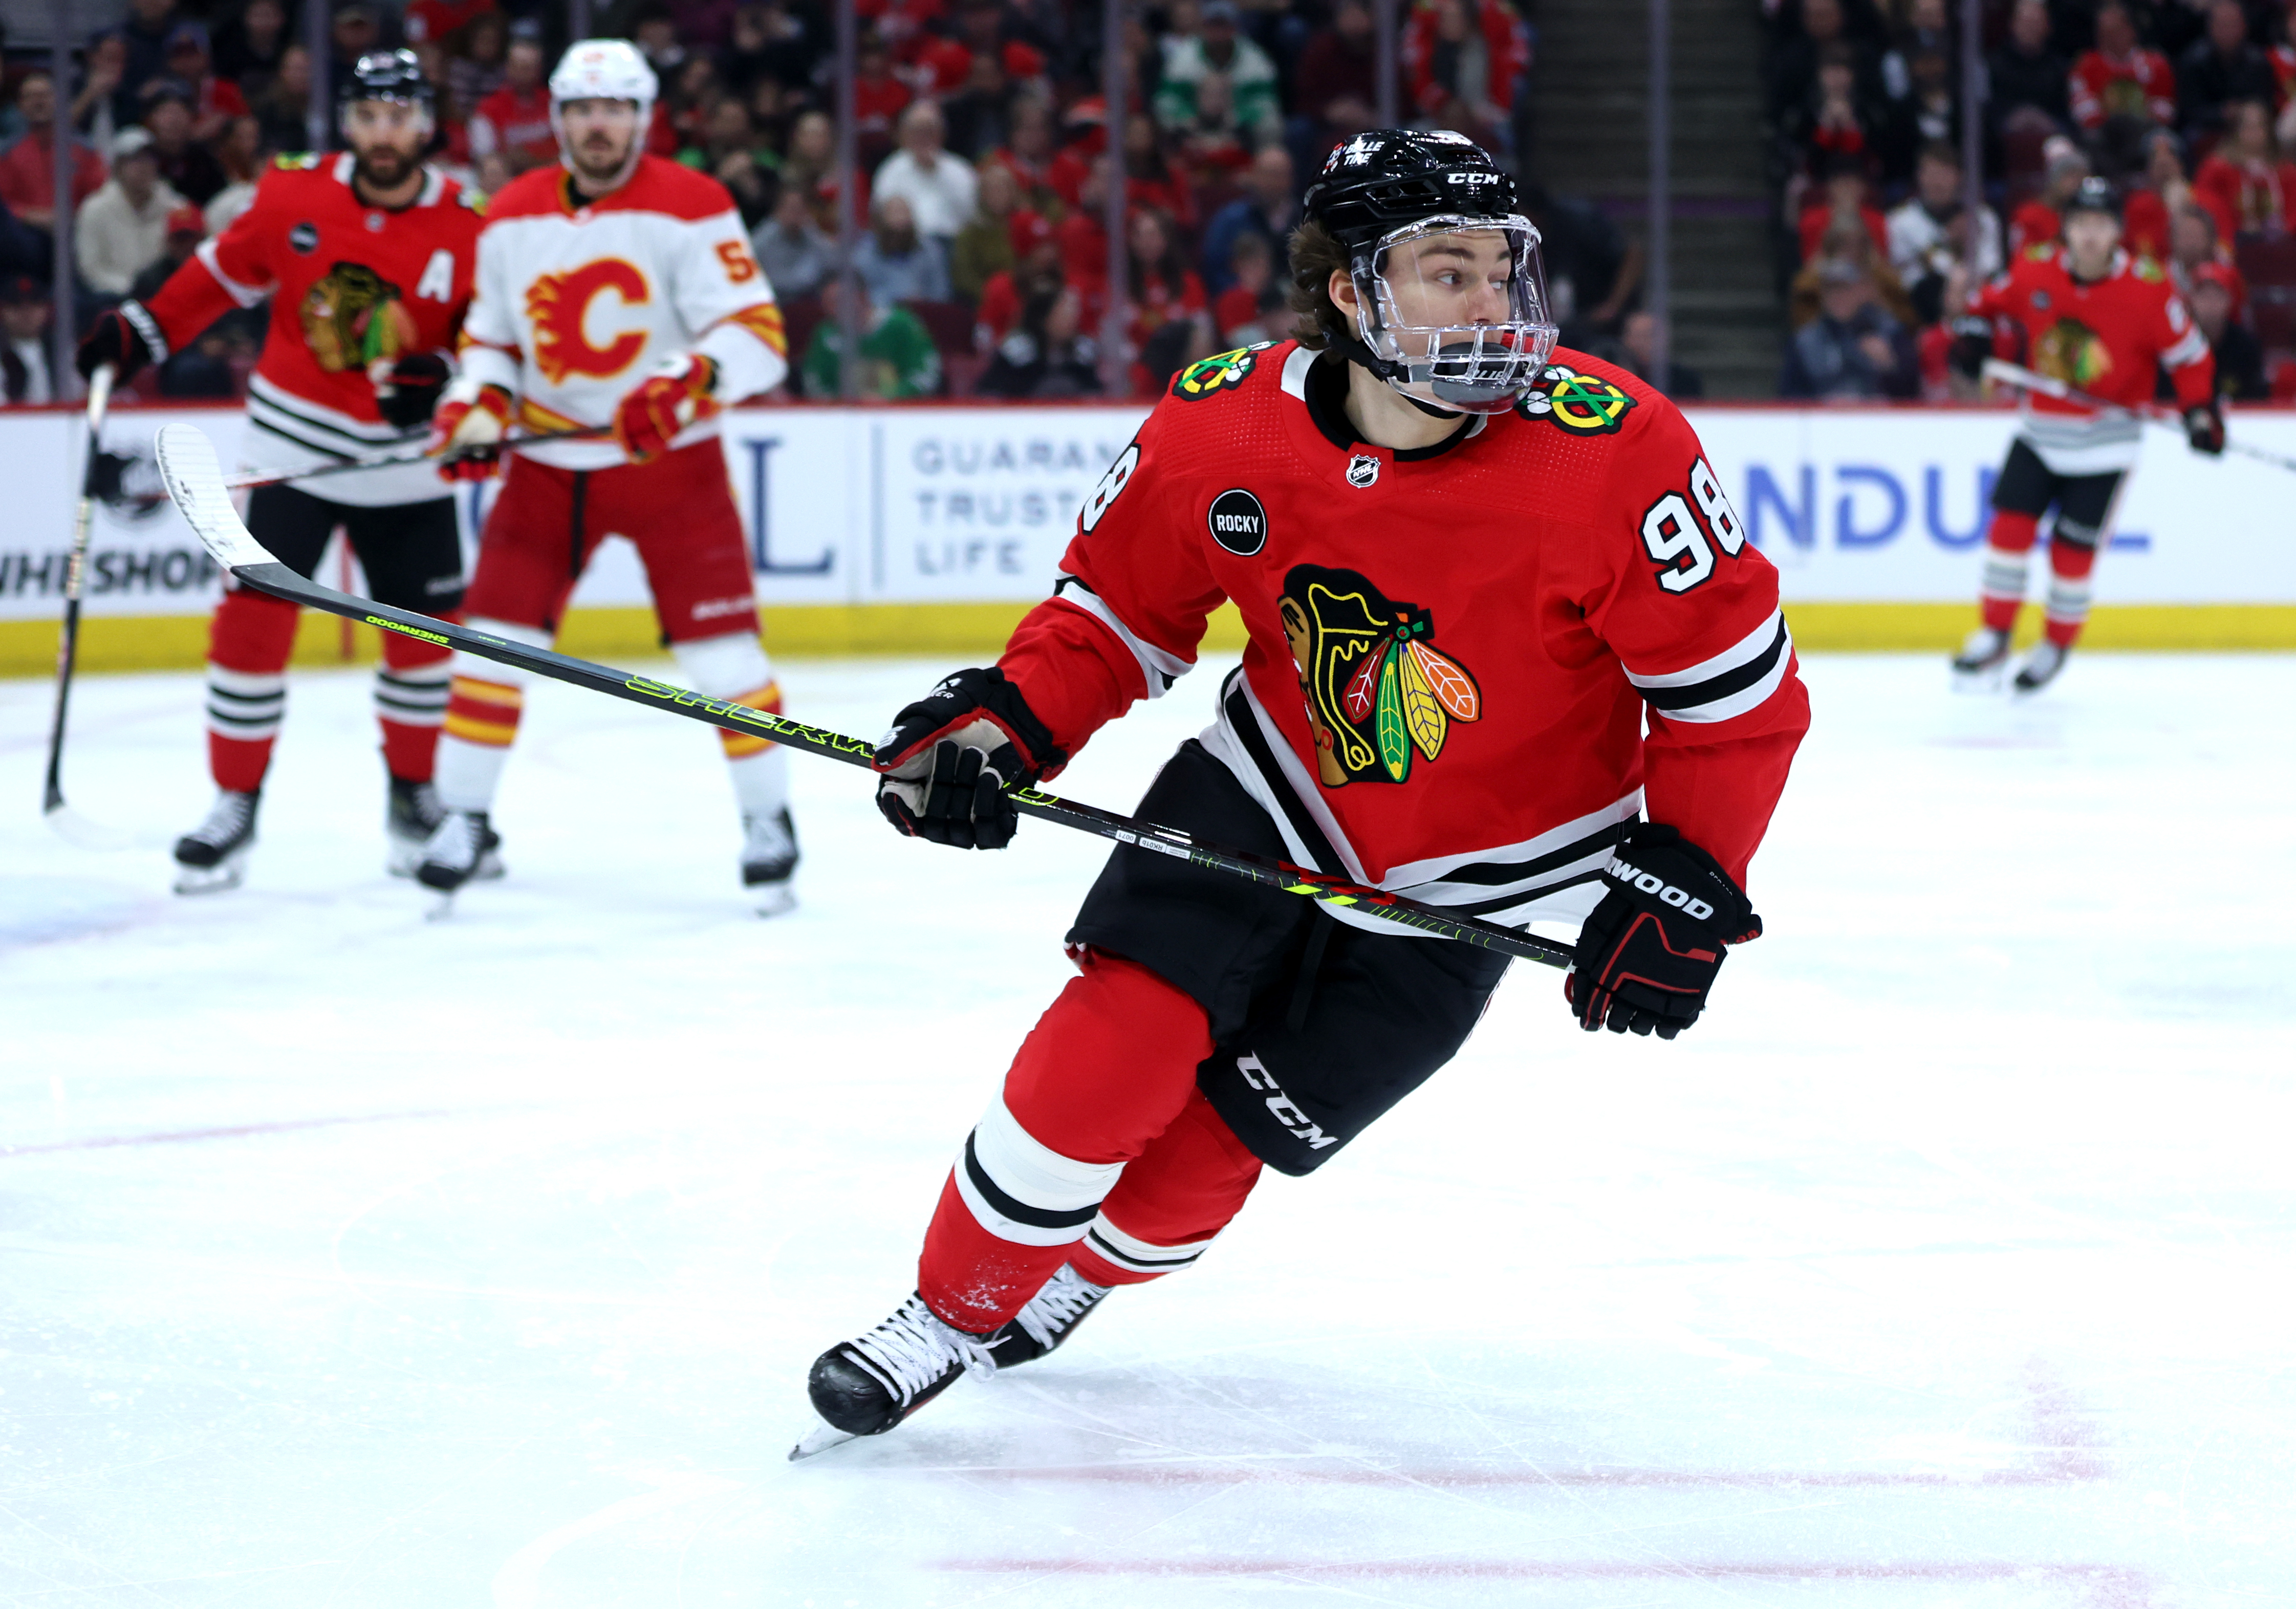 Chicago Blackhawks center Connor Bedard (98) skates down the ice in the first period of a game against the Calgary Flames at the United Center in Chicago on March 26, 2024. (Chris Sweda/Chicago Tribune)